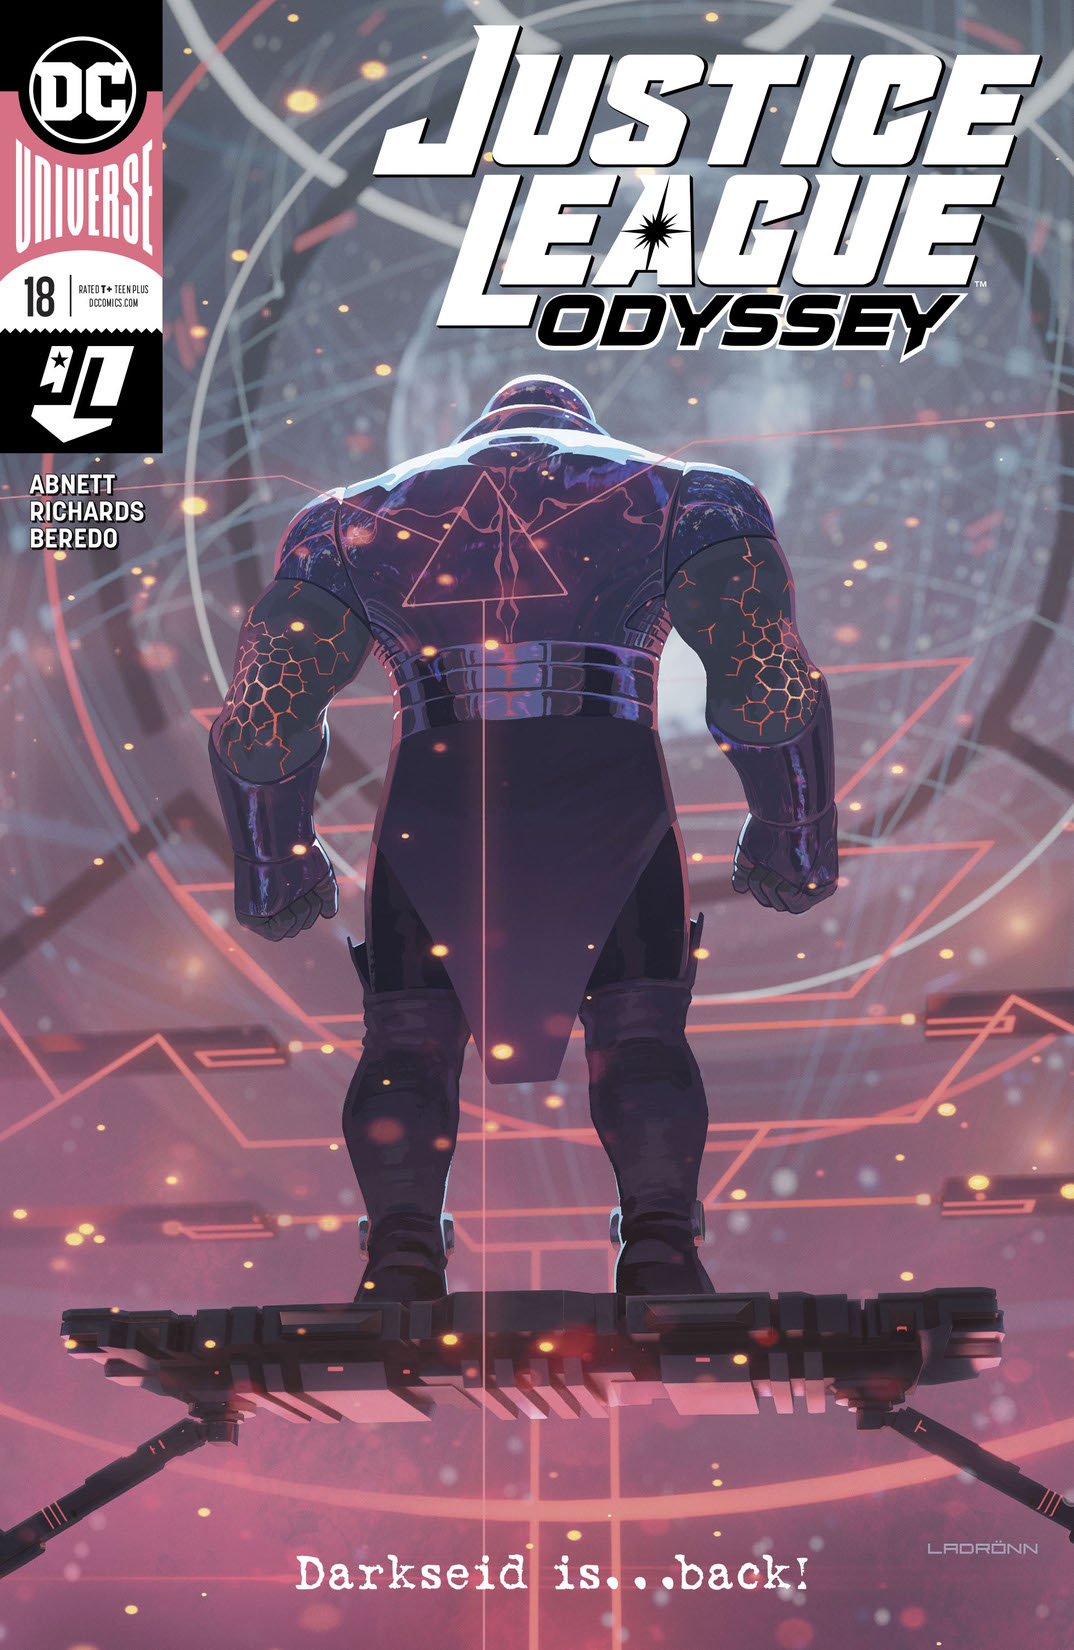 Justice League Odyssey #18 preview images